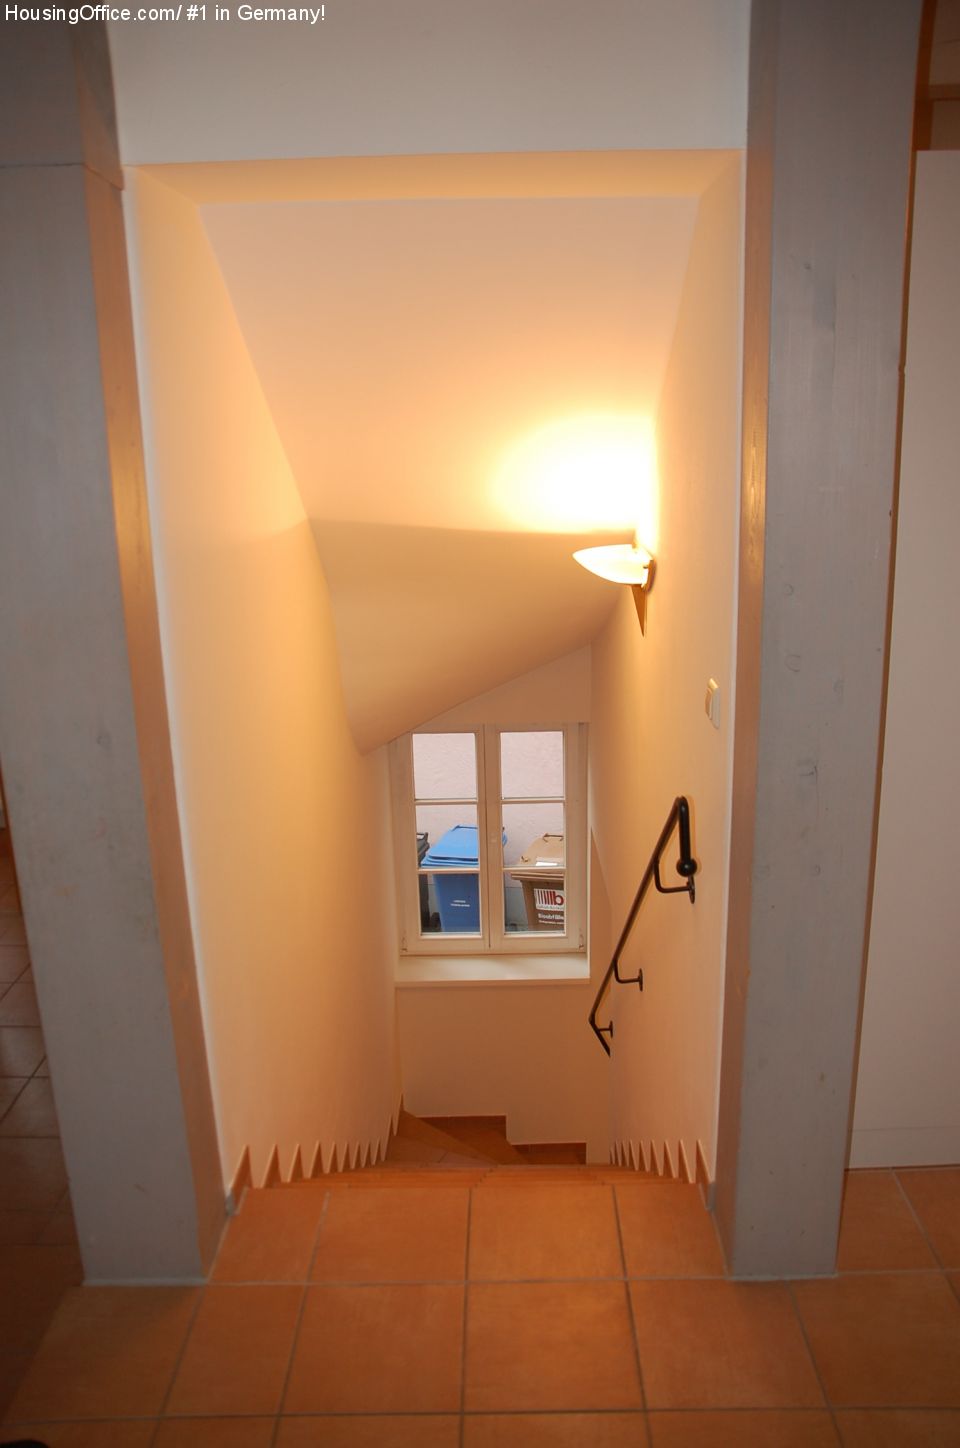 Stairs to the 1st floor